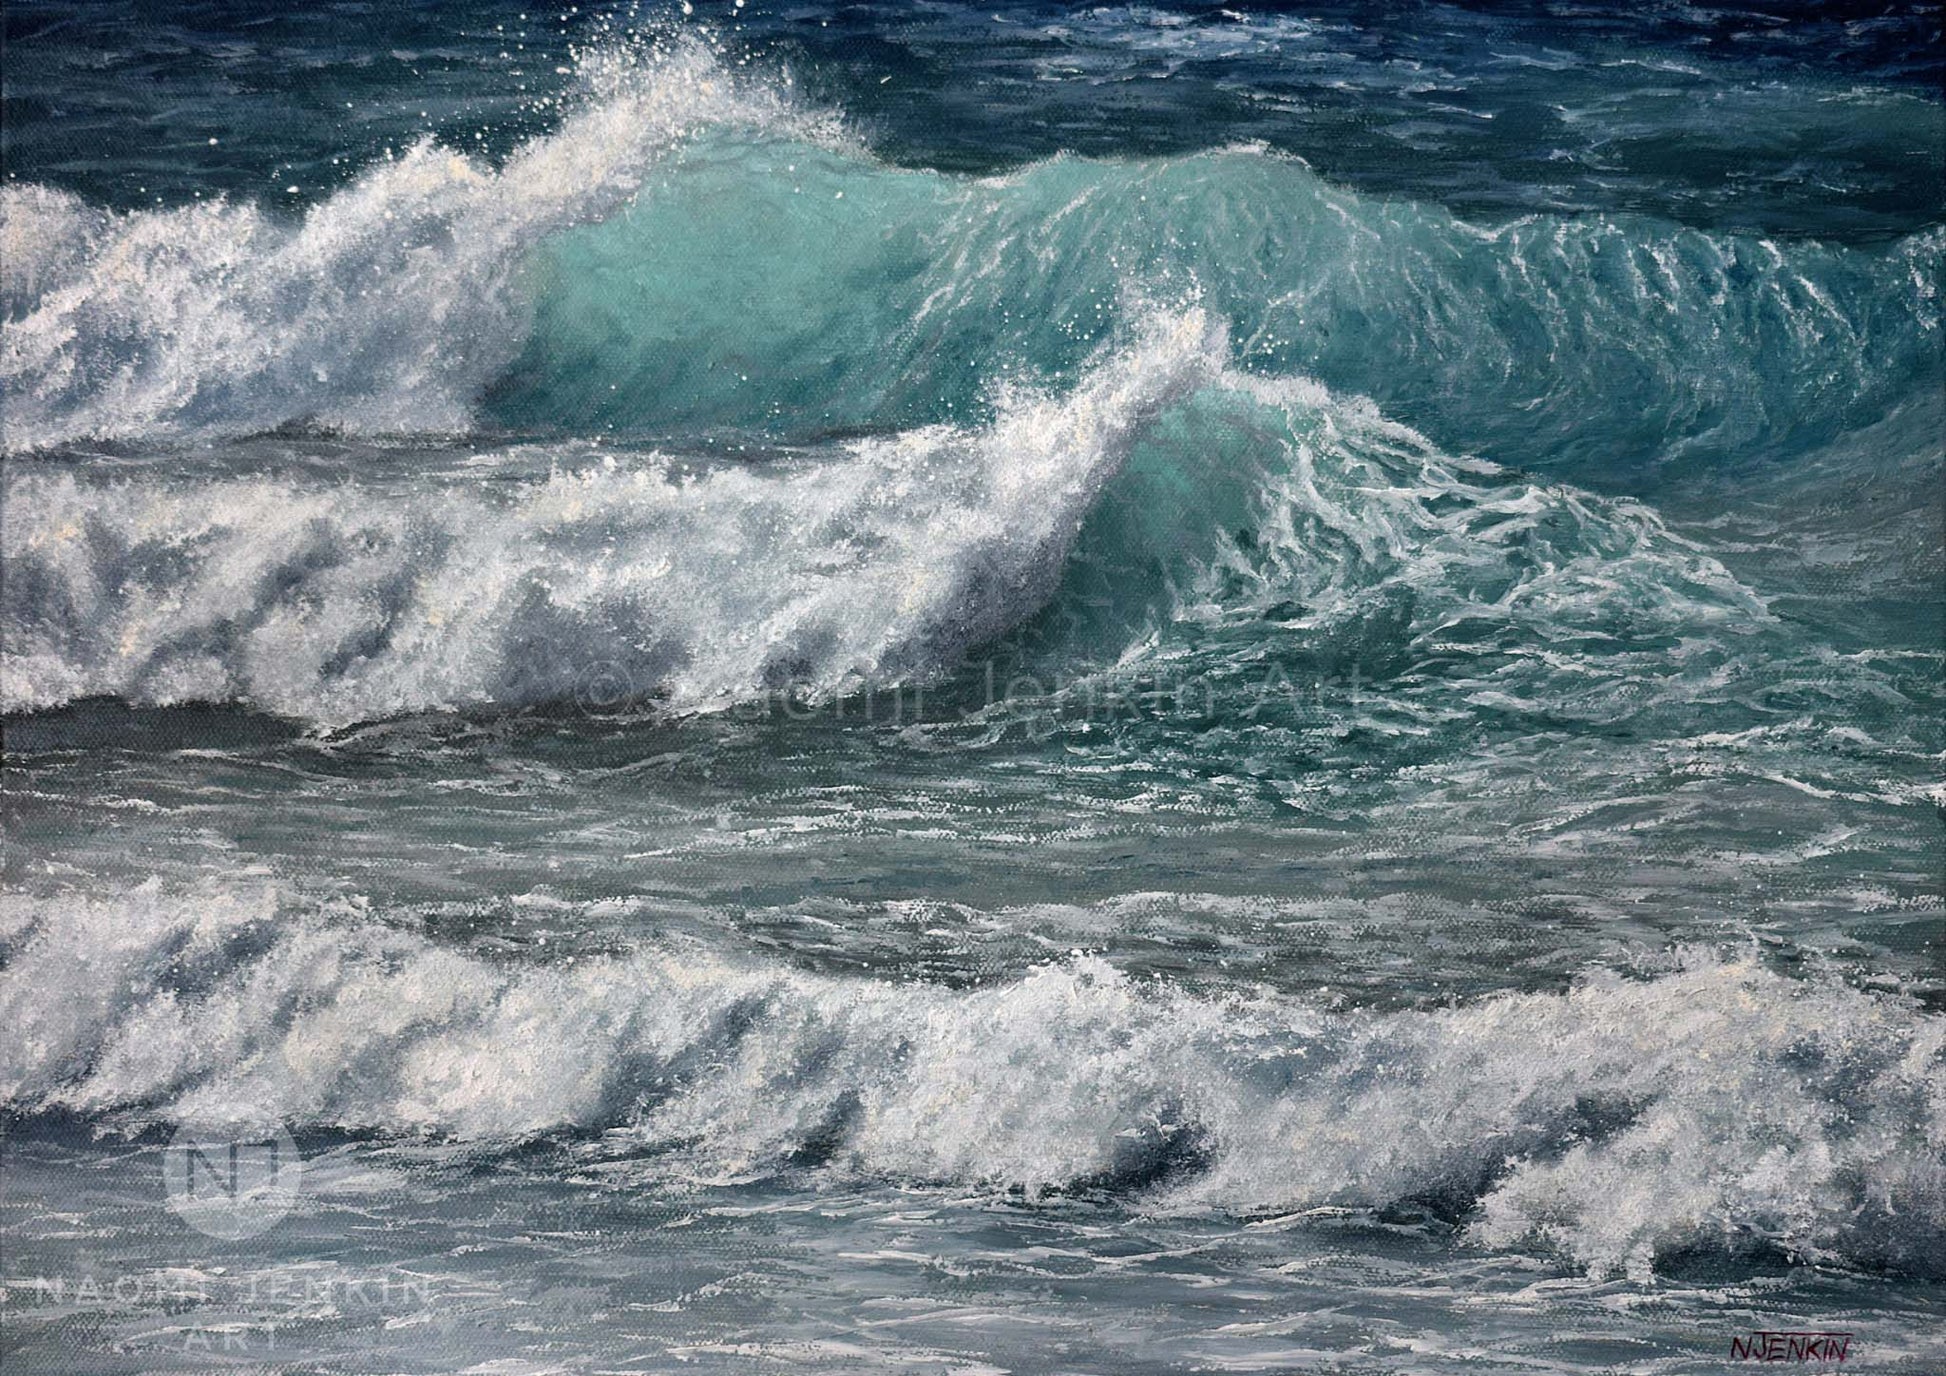 Seascape print 'Whitewater Waves' inspired by crashing turquoise waves